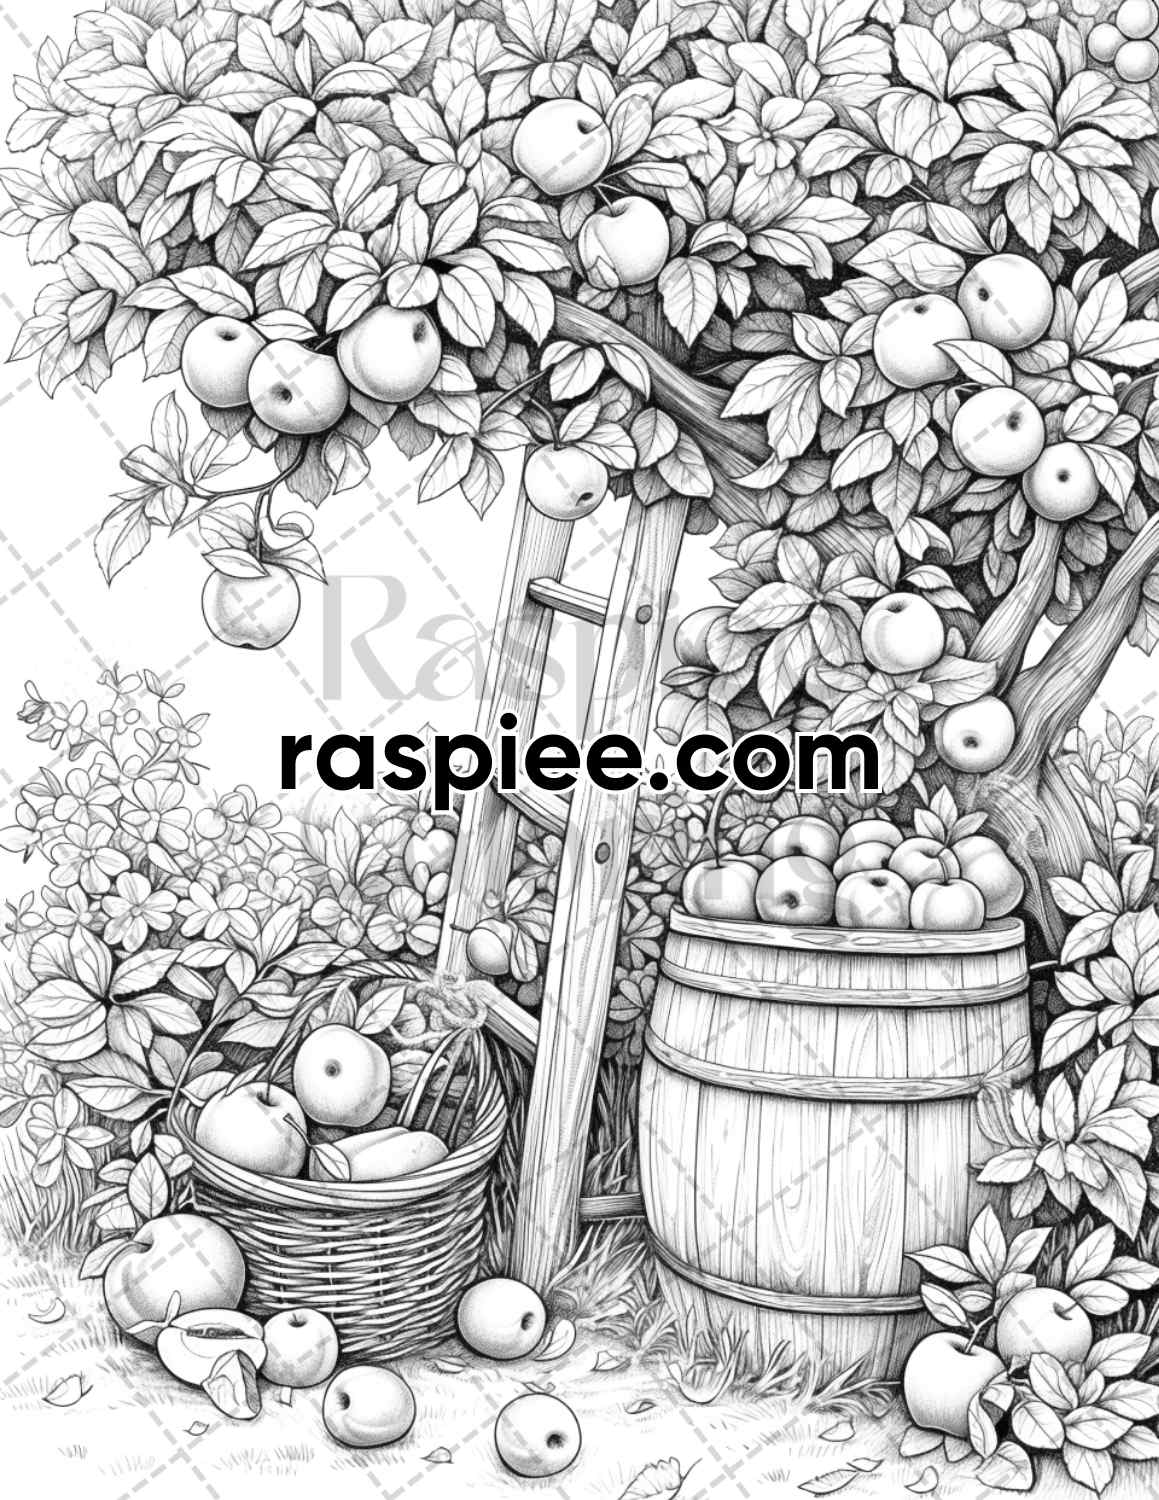 adult coloring pages, adult coloring sheets, adult coloring book pdf, adult coloring book printable, grayscale coloring pages, grayscale coloring books, cottage garden coloring pages for adults, cottage garden coloring book, grayscale illustration, spring adult coloring pages, flower coloring pages, summer coloring pages, autumn coloring pages